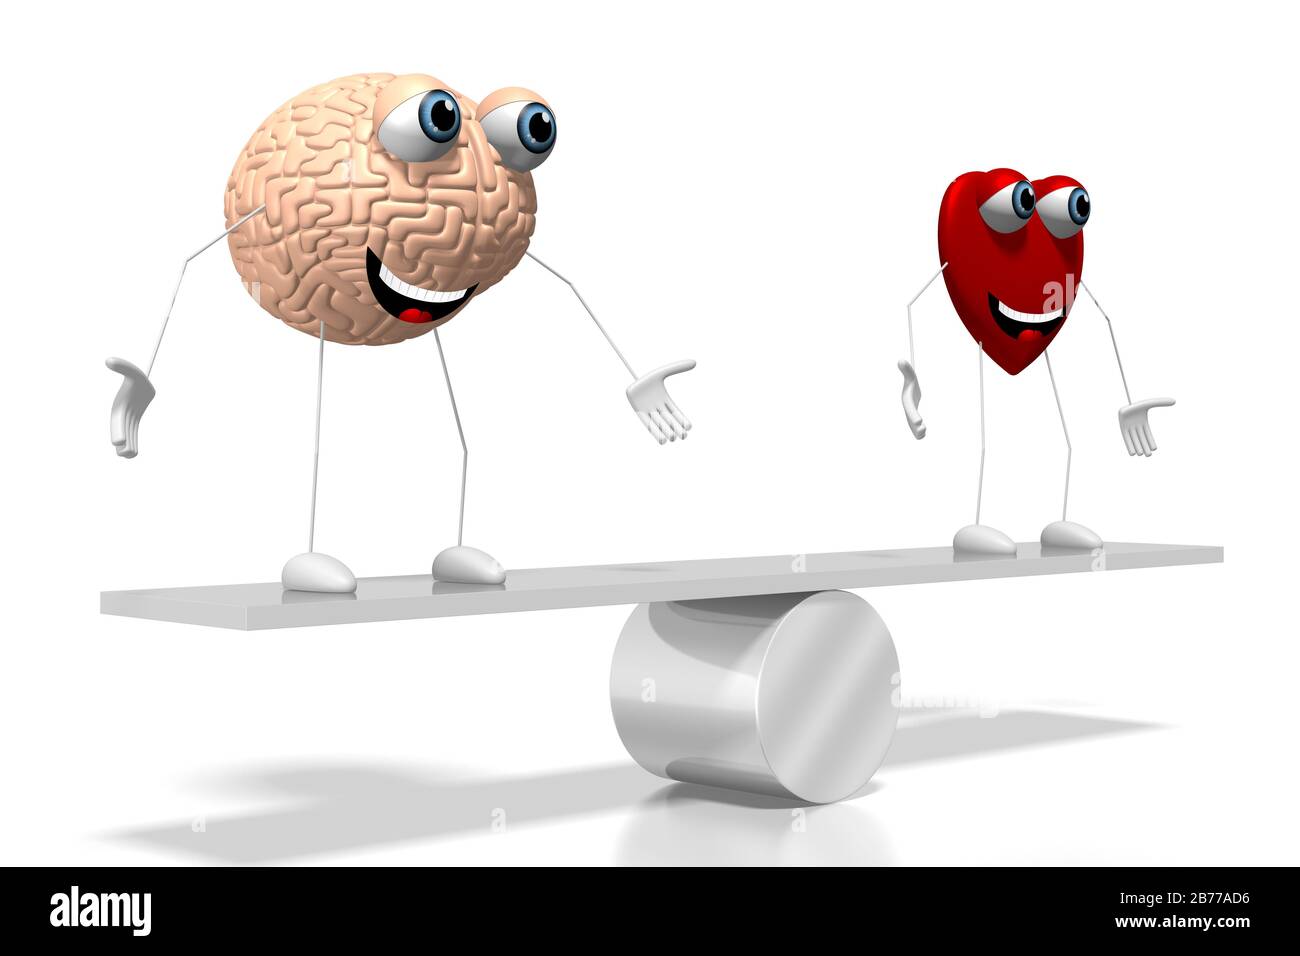 3D heart and brain cartoon characters, swing concept - great for topics like emotions etc. Stock Photo